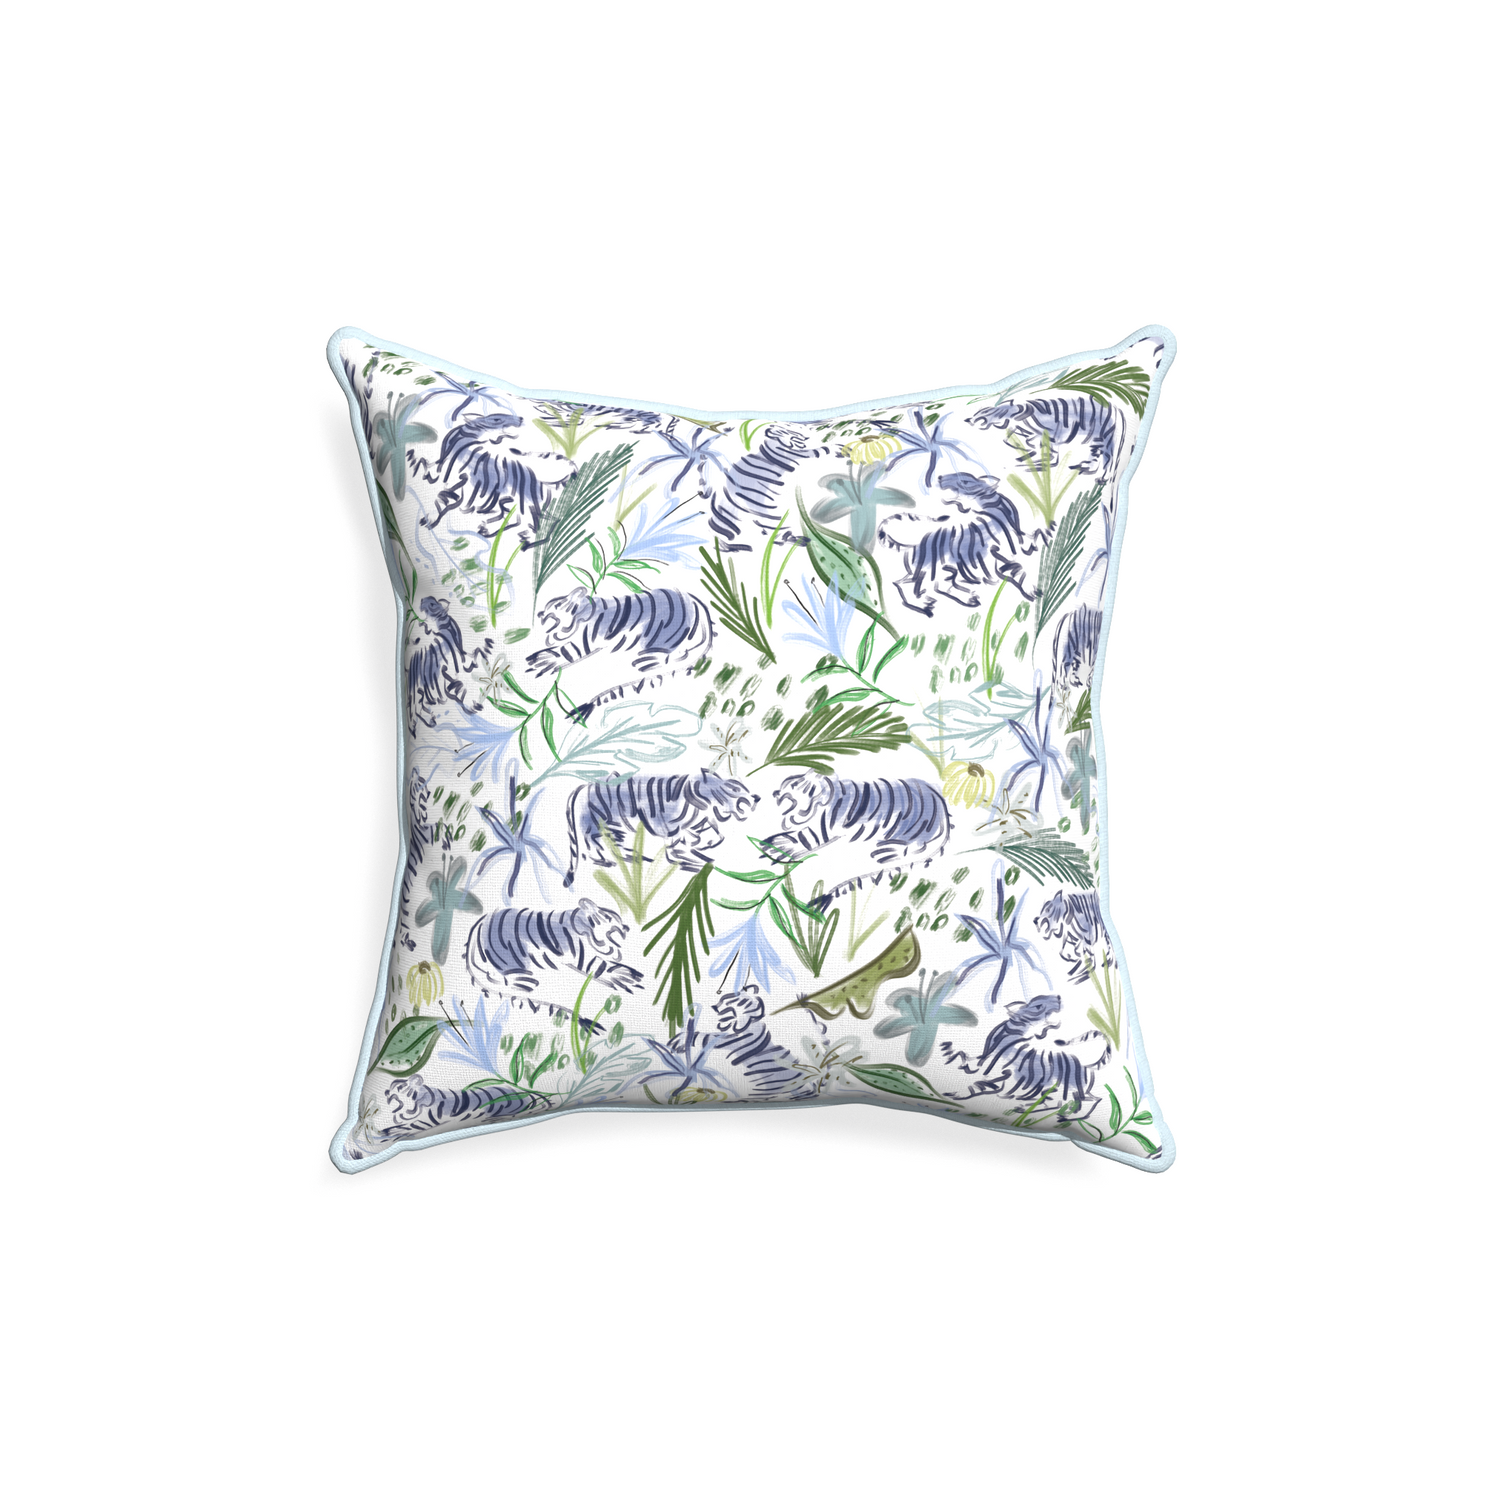 18-square frida green custom pillow with powder piping on white background